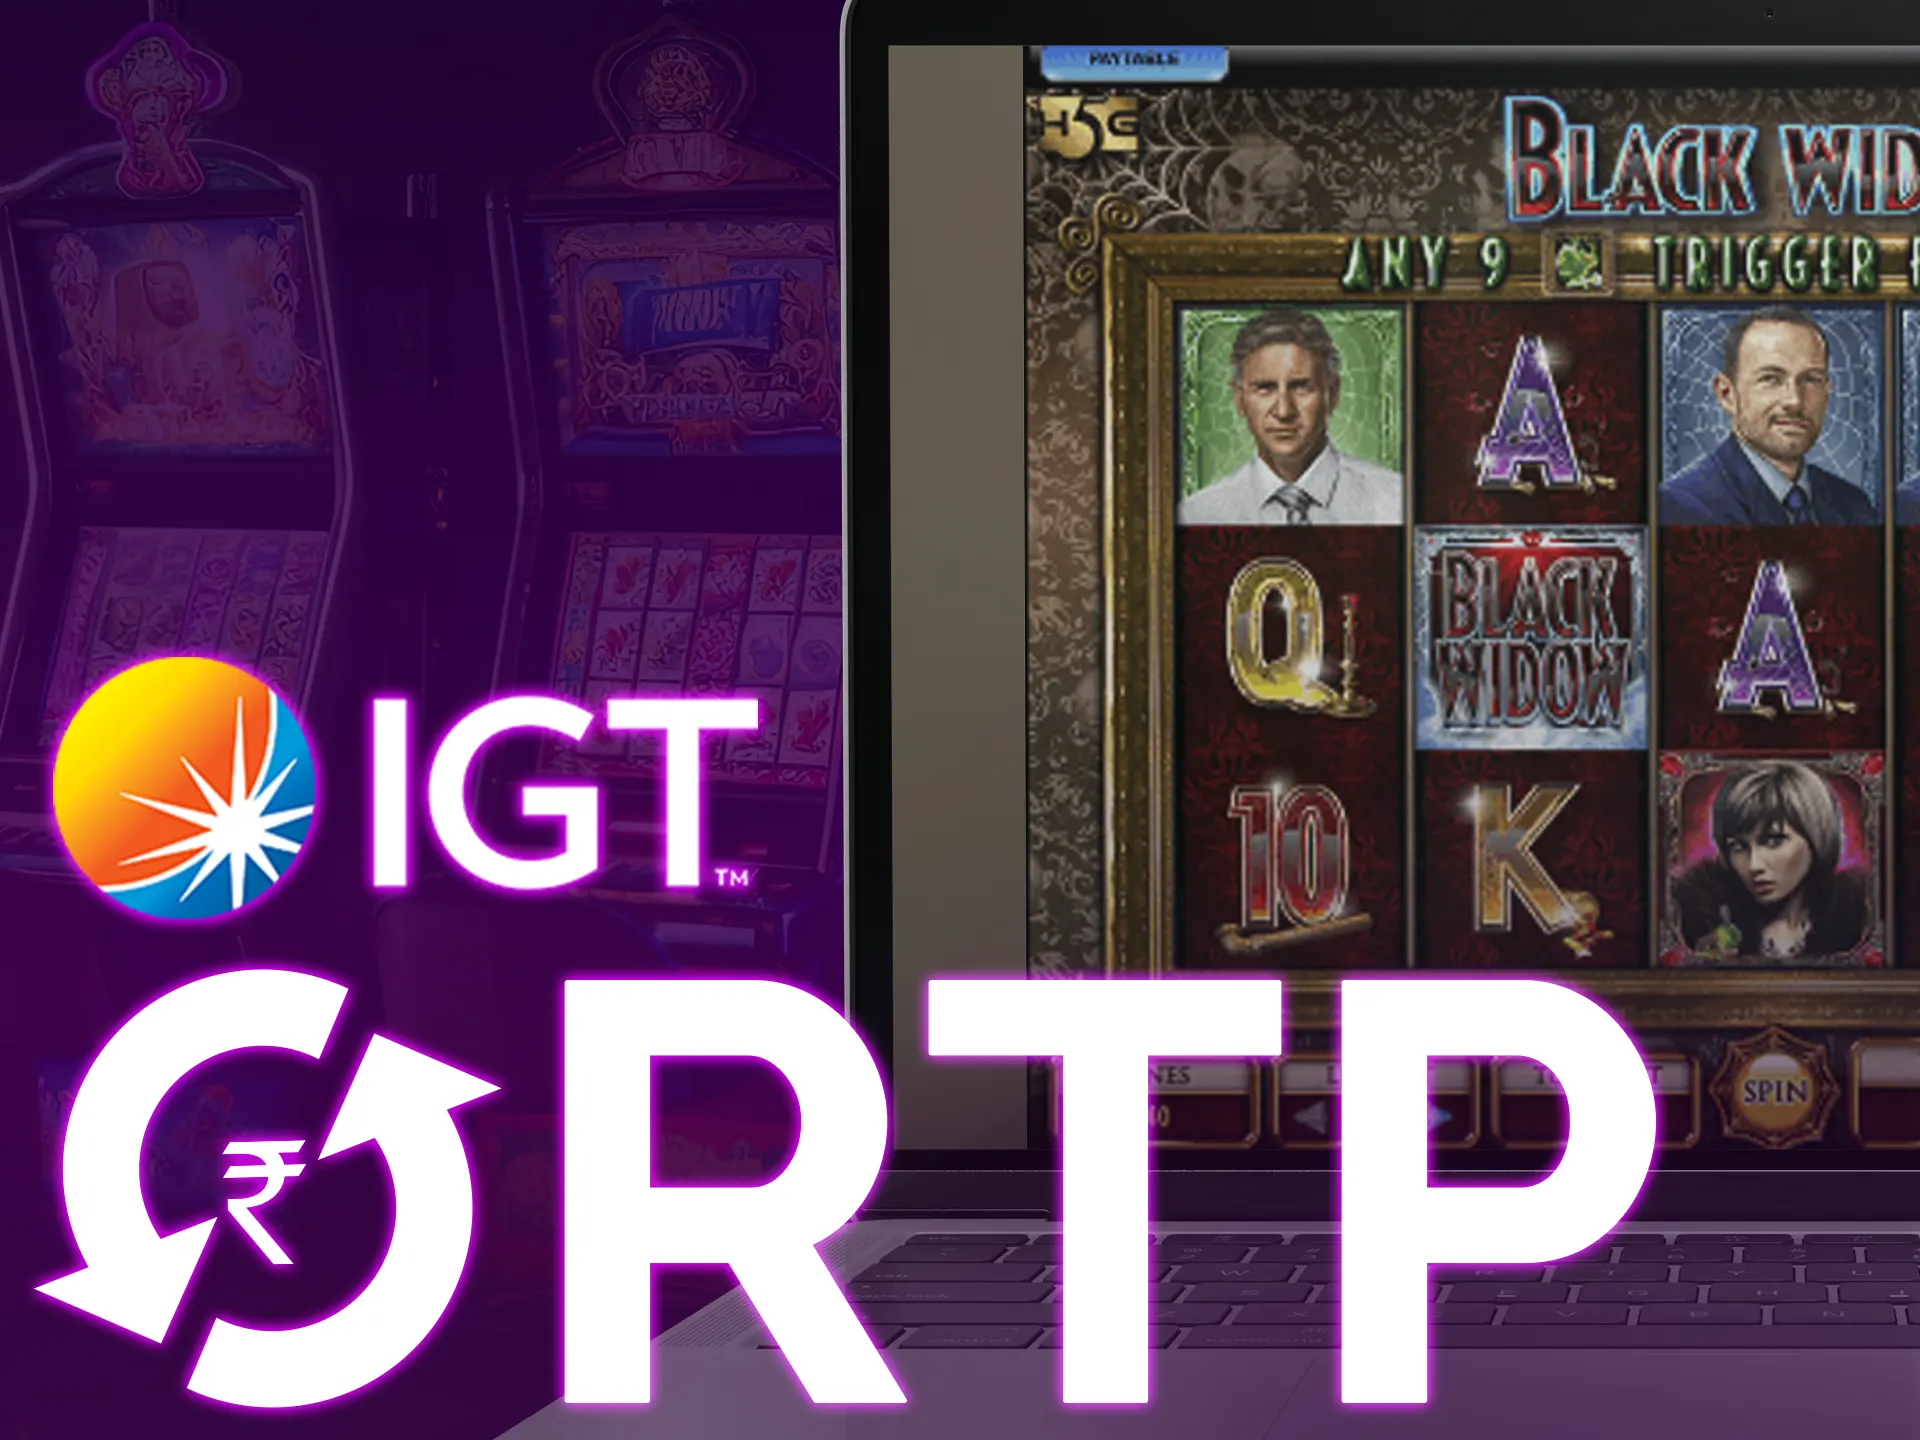 IGT provides games with high RTP percentage.